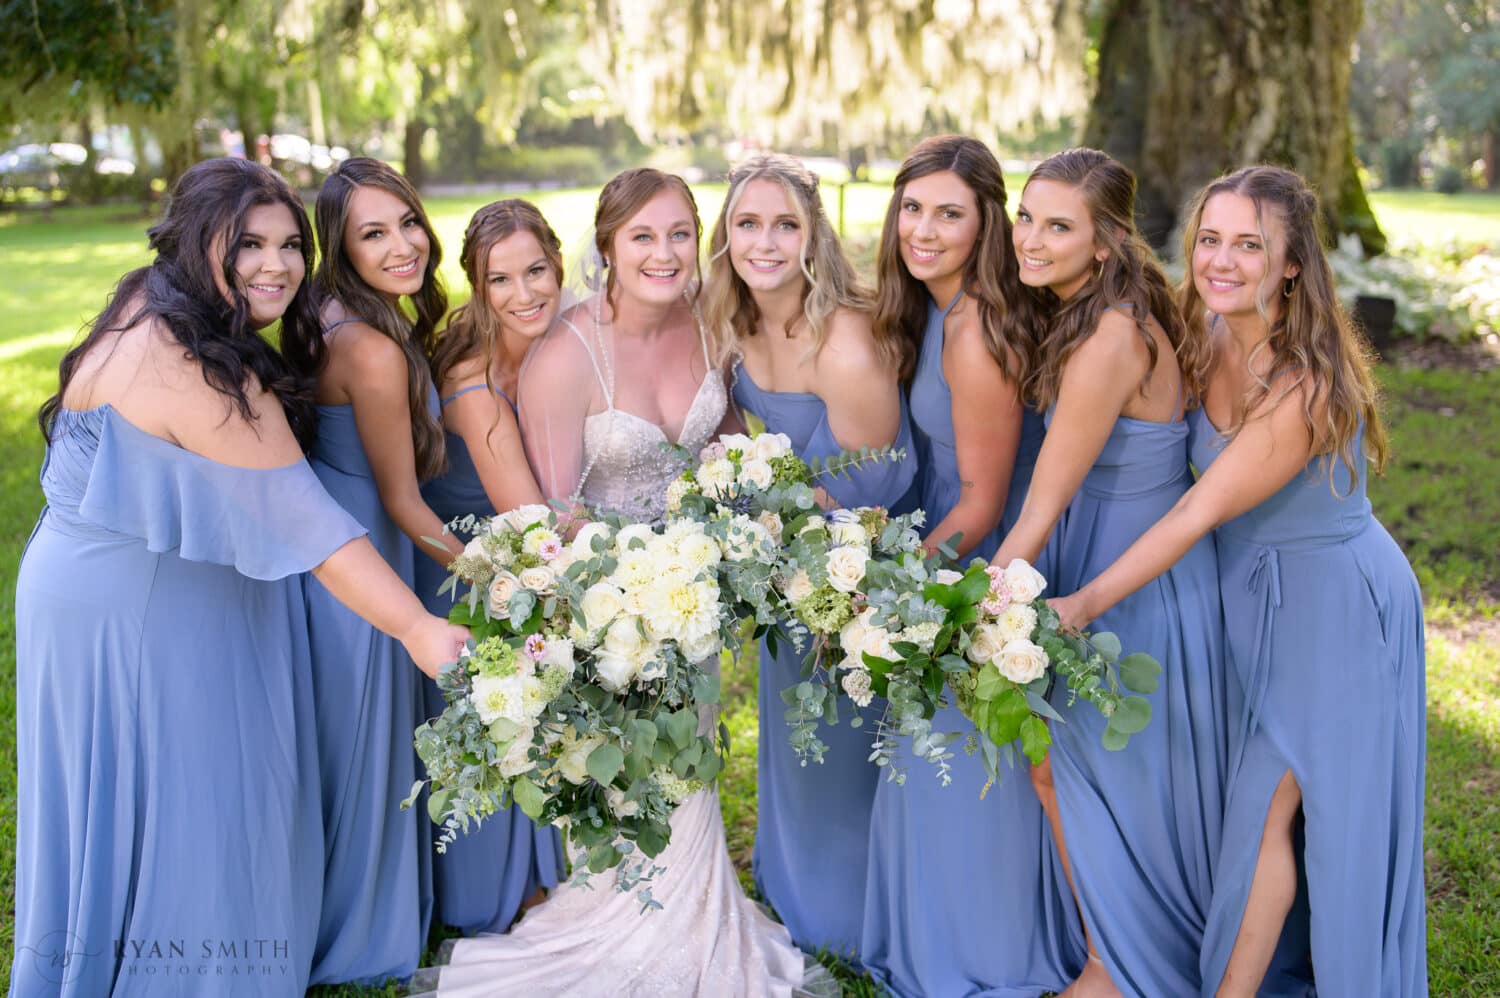 Bridesmaids holding the flowers together - Magnolia Plantation